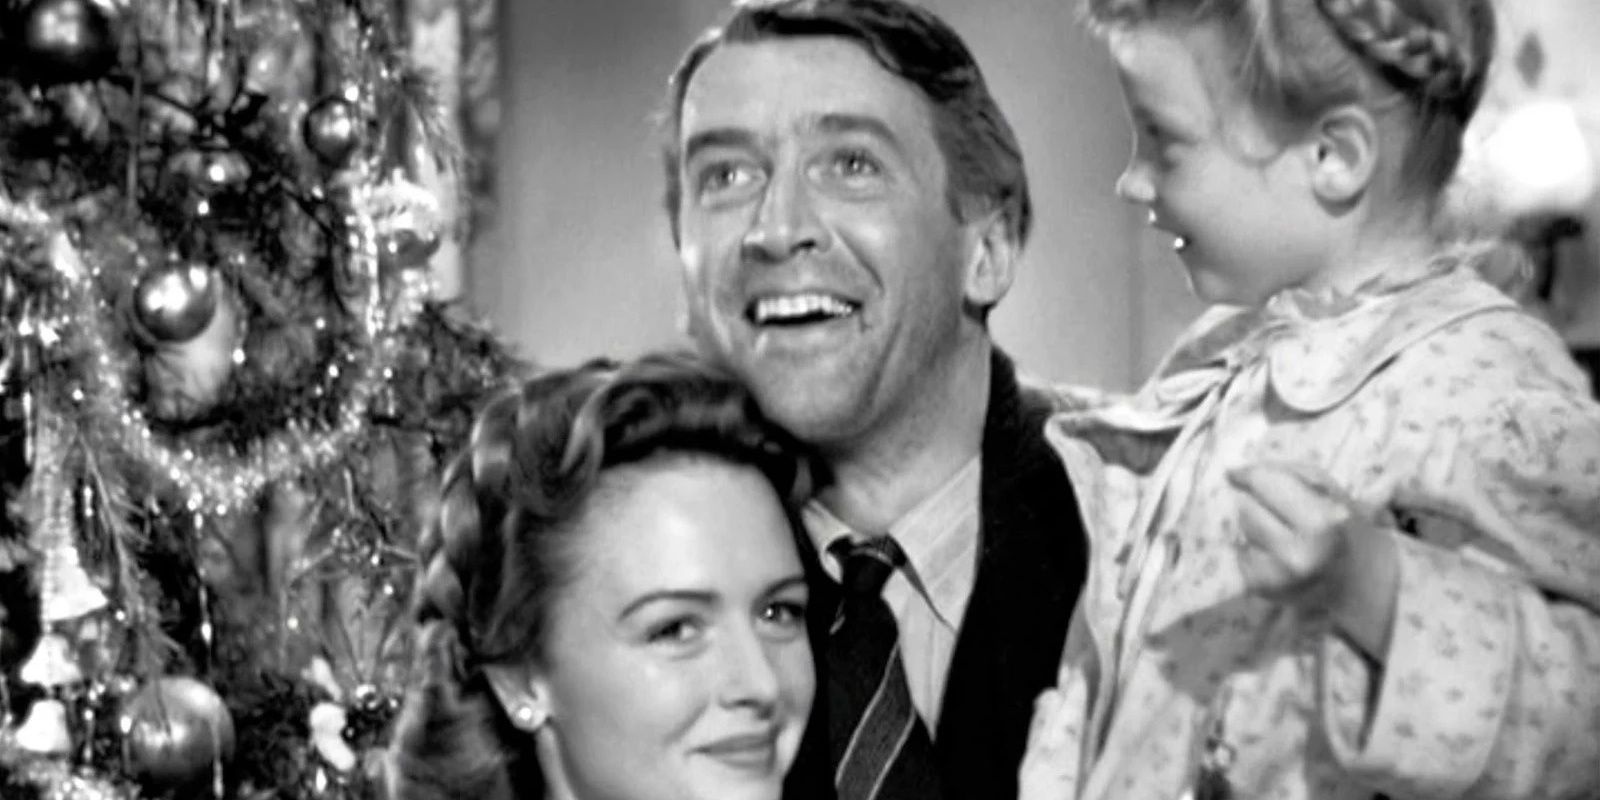 George with his family in It's a Wonderful Life 